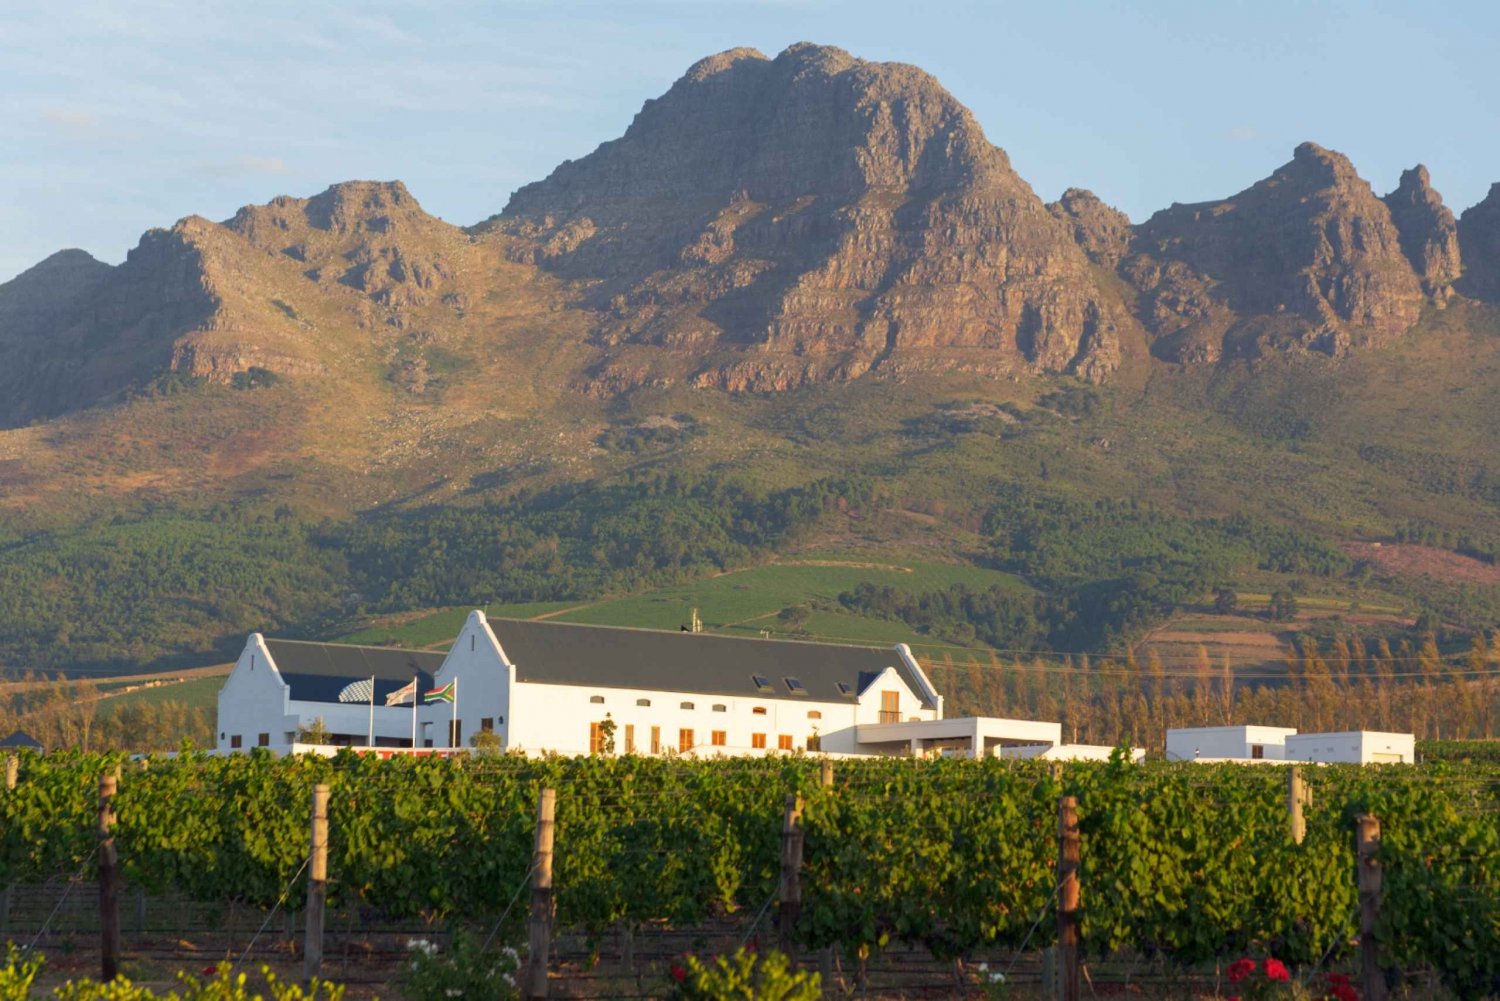 Cape Point Highlights Tour with Wine Tasting in Stellenbosch